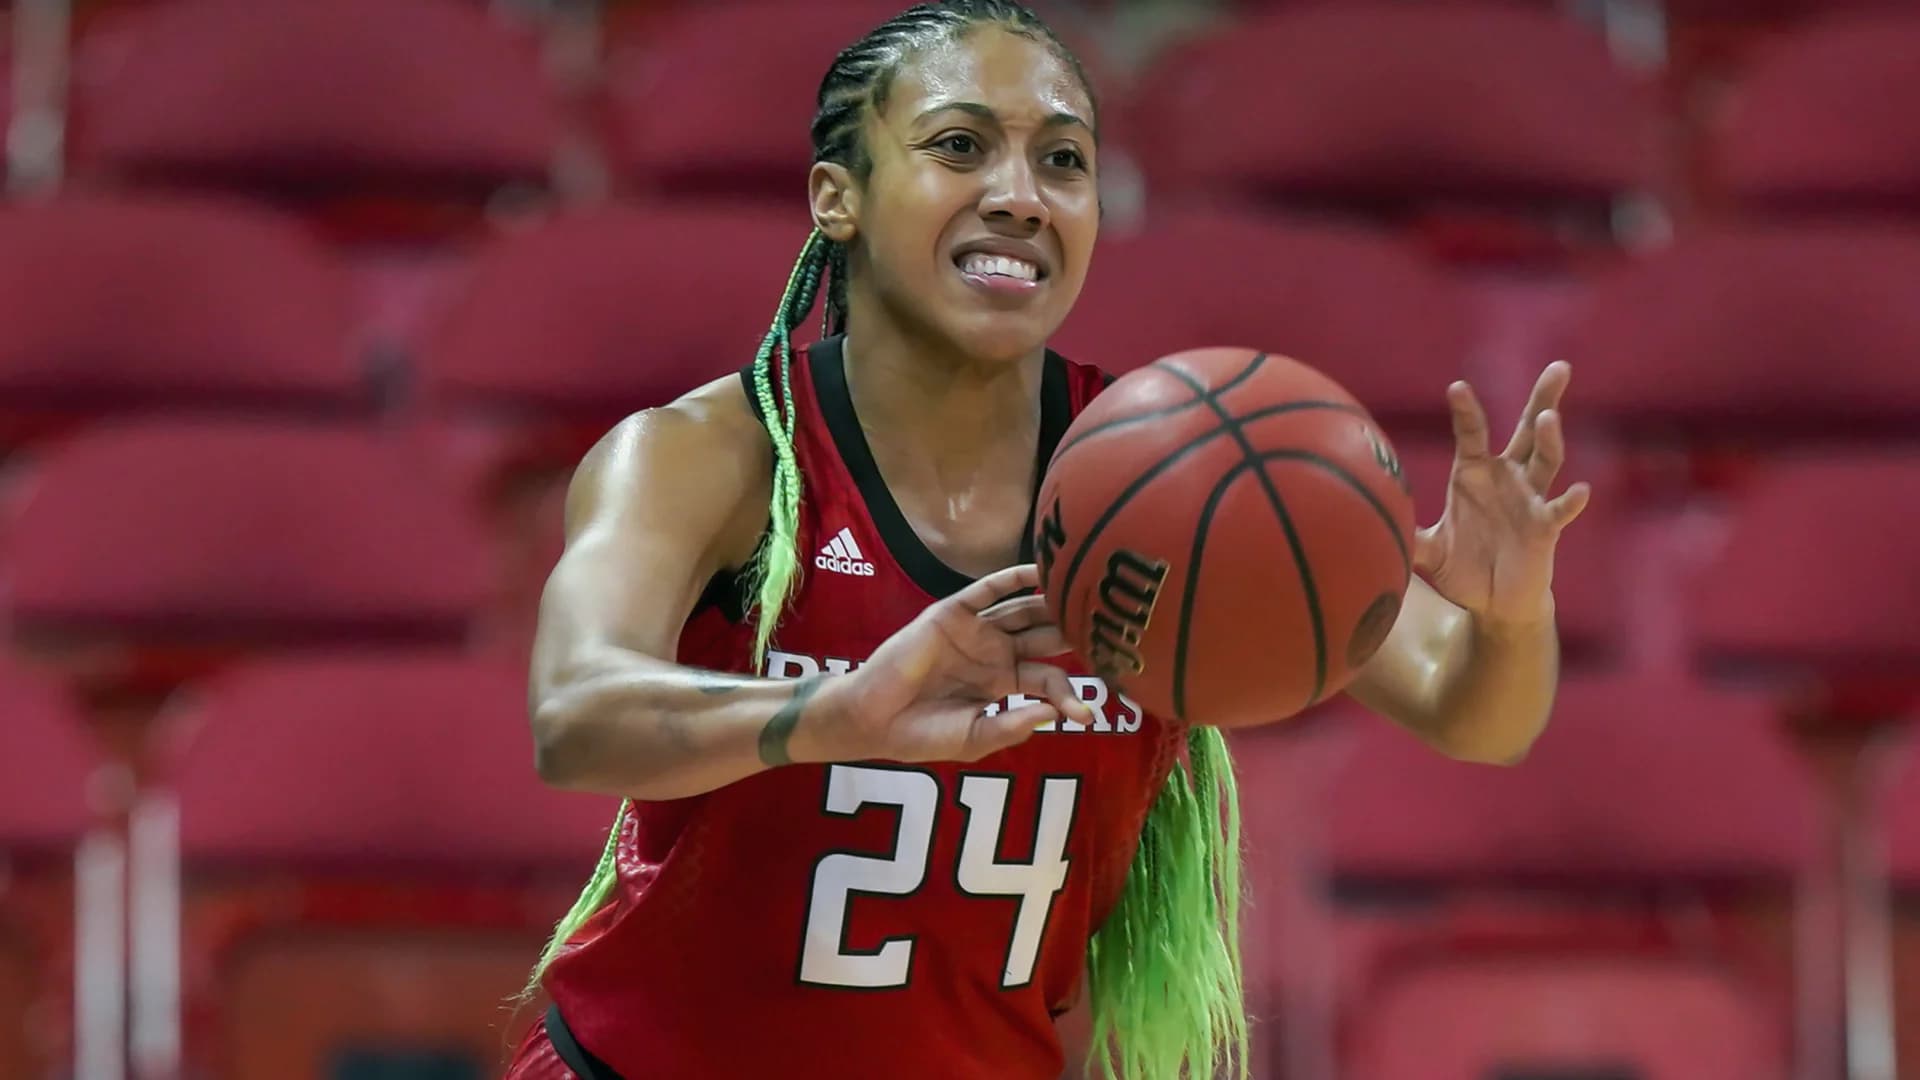 Long Island, Rutgers star Guirantes selected No. 22 in WNBA Draft by LA Sparks